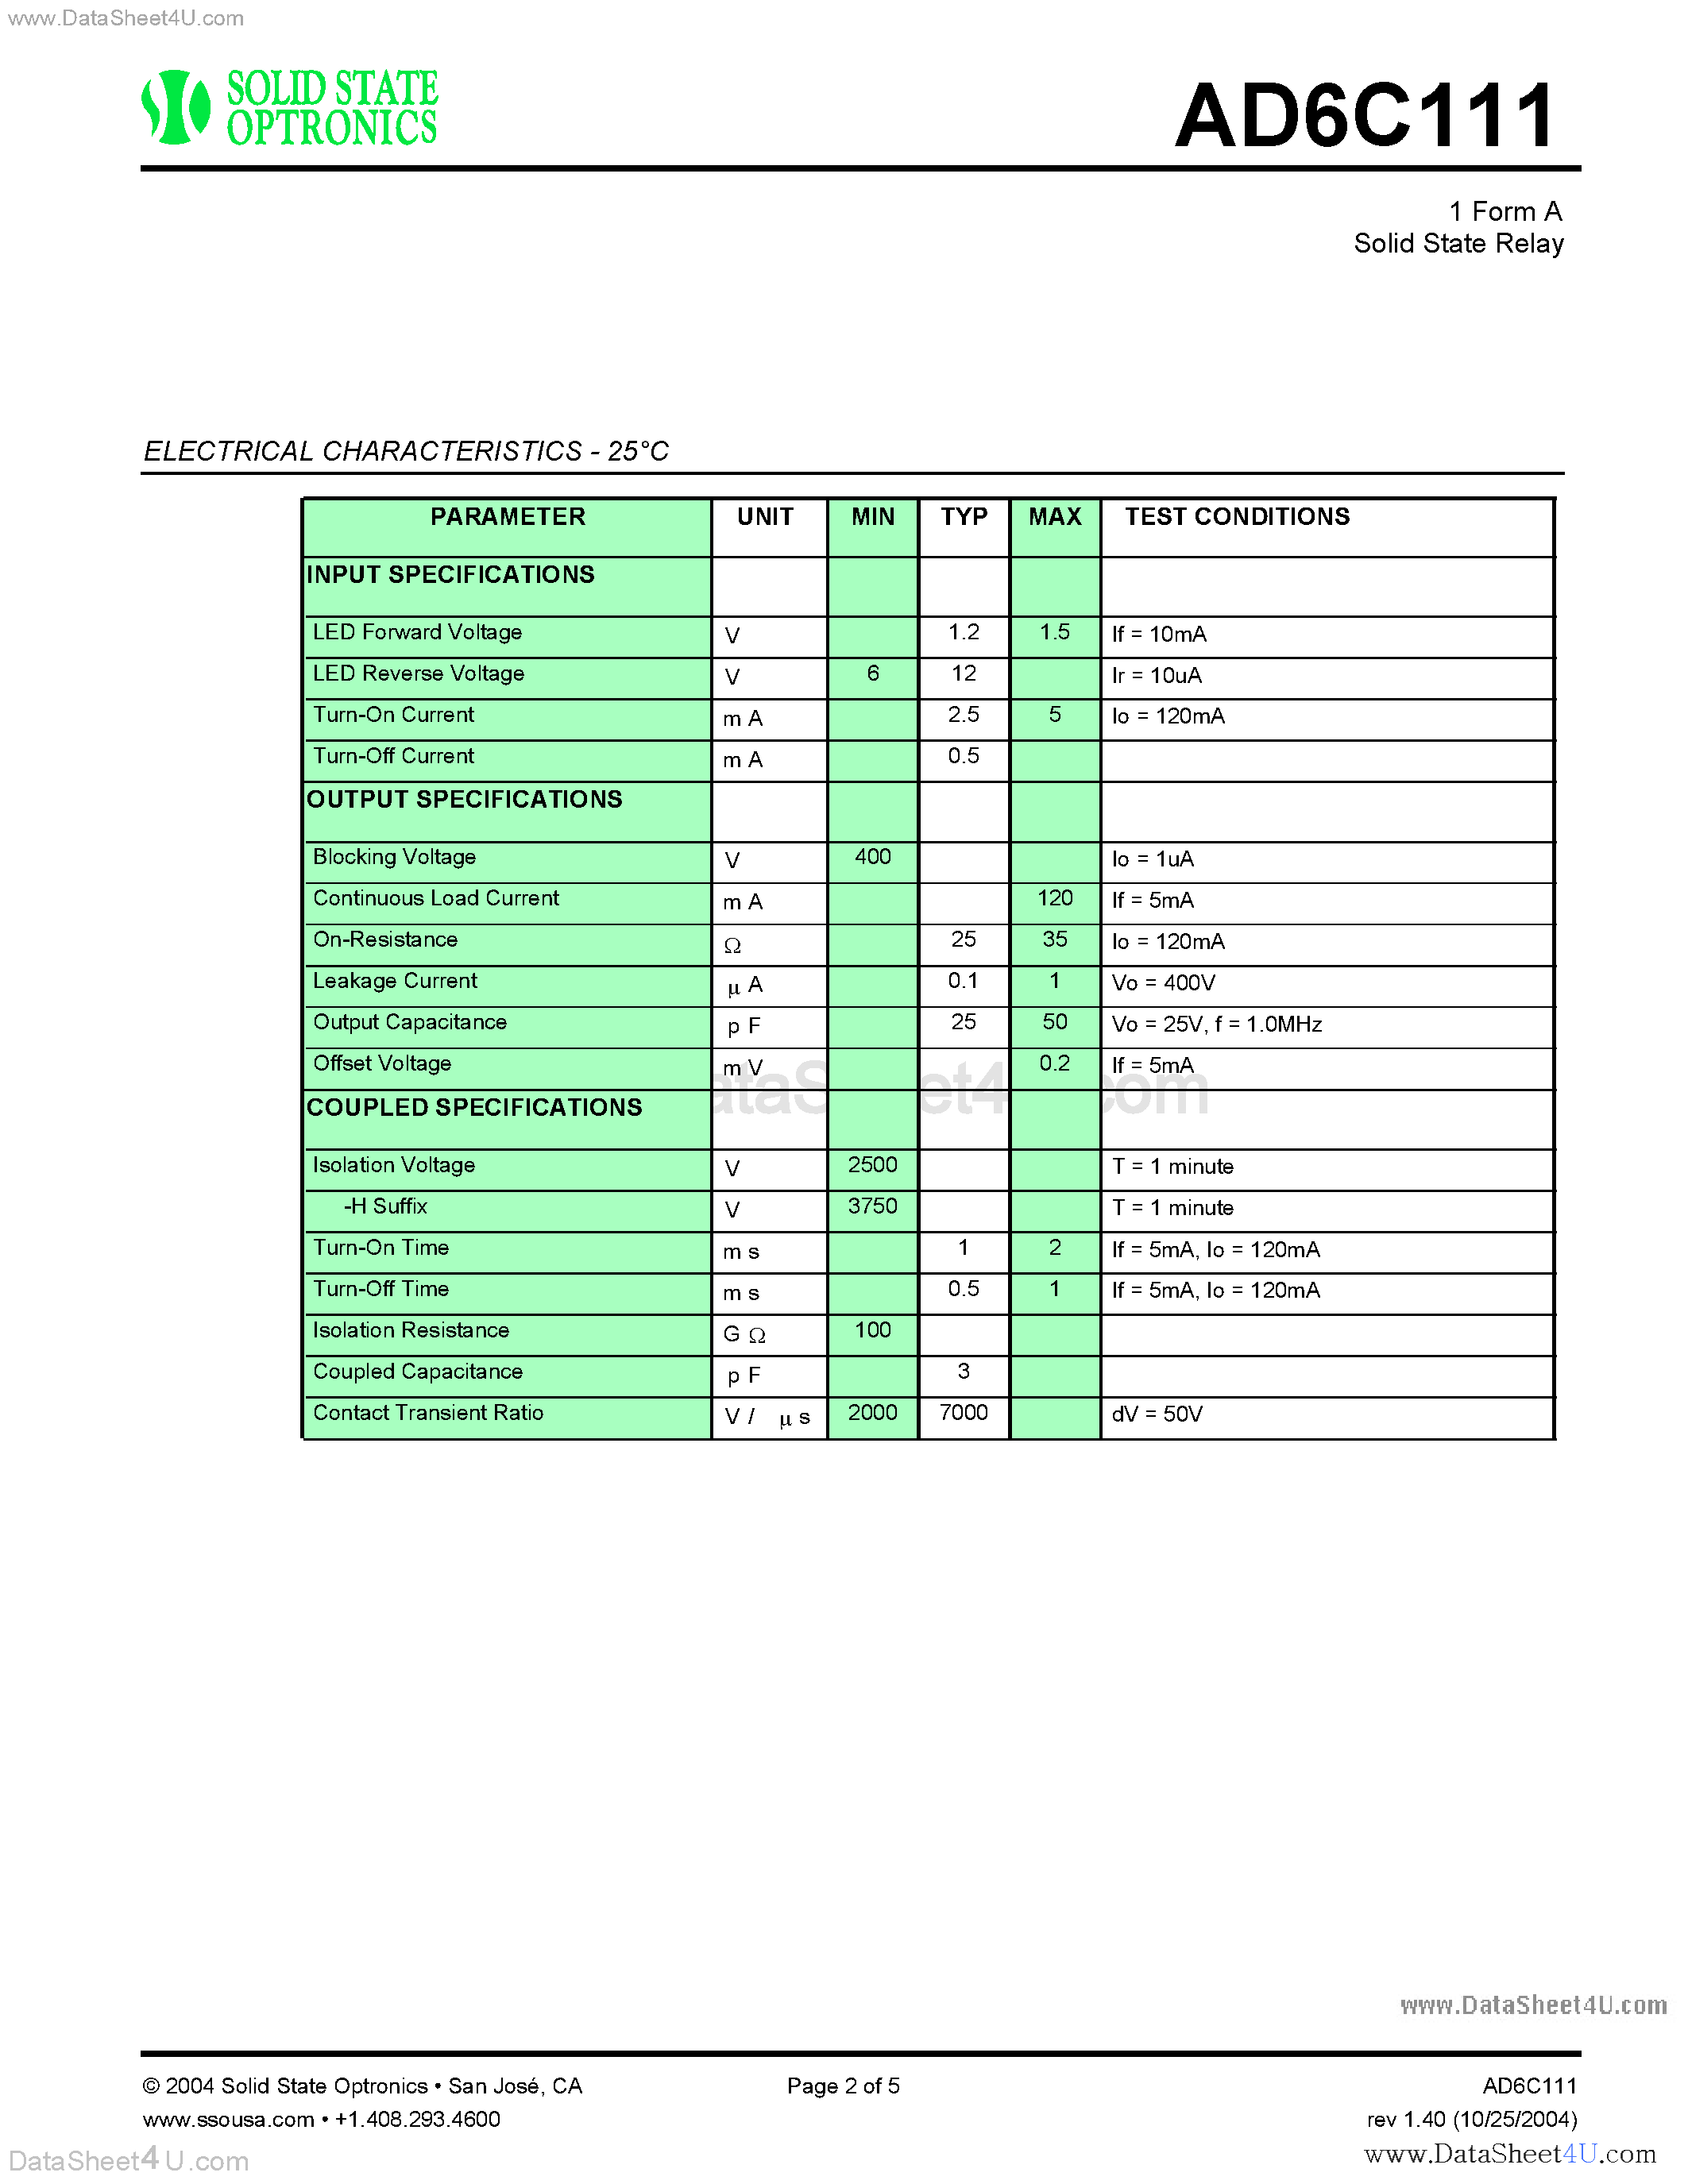 Datasheet AD6-C111 - Relay page 2